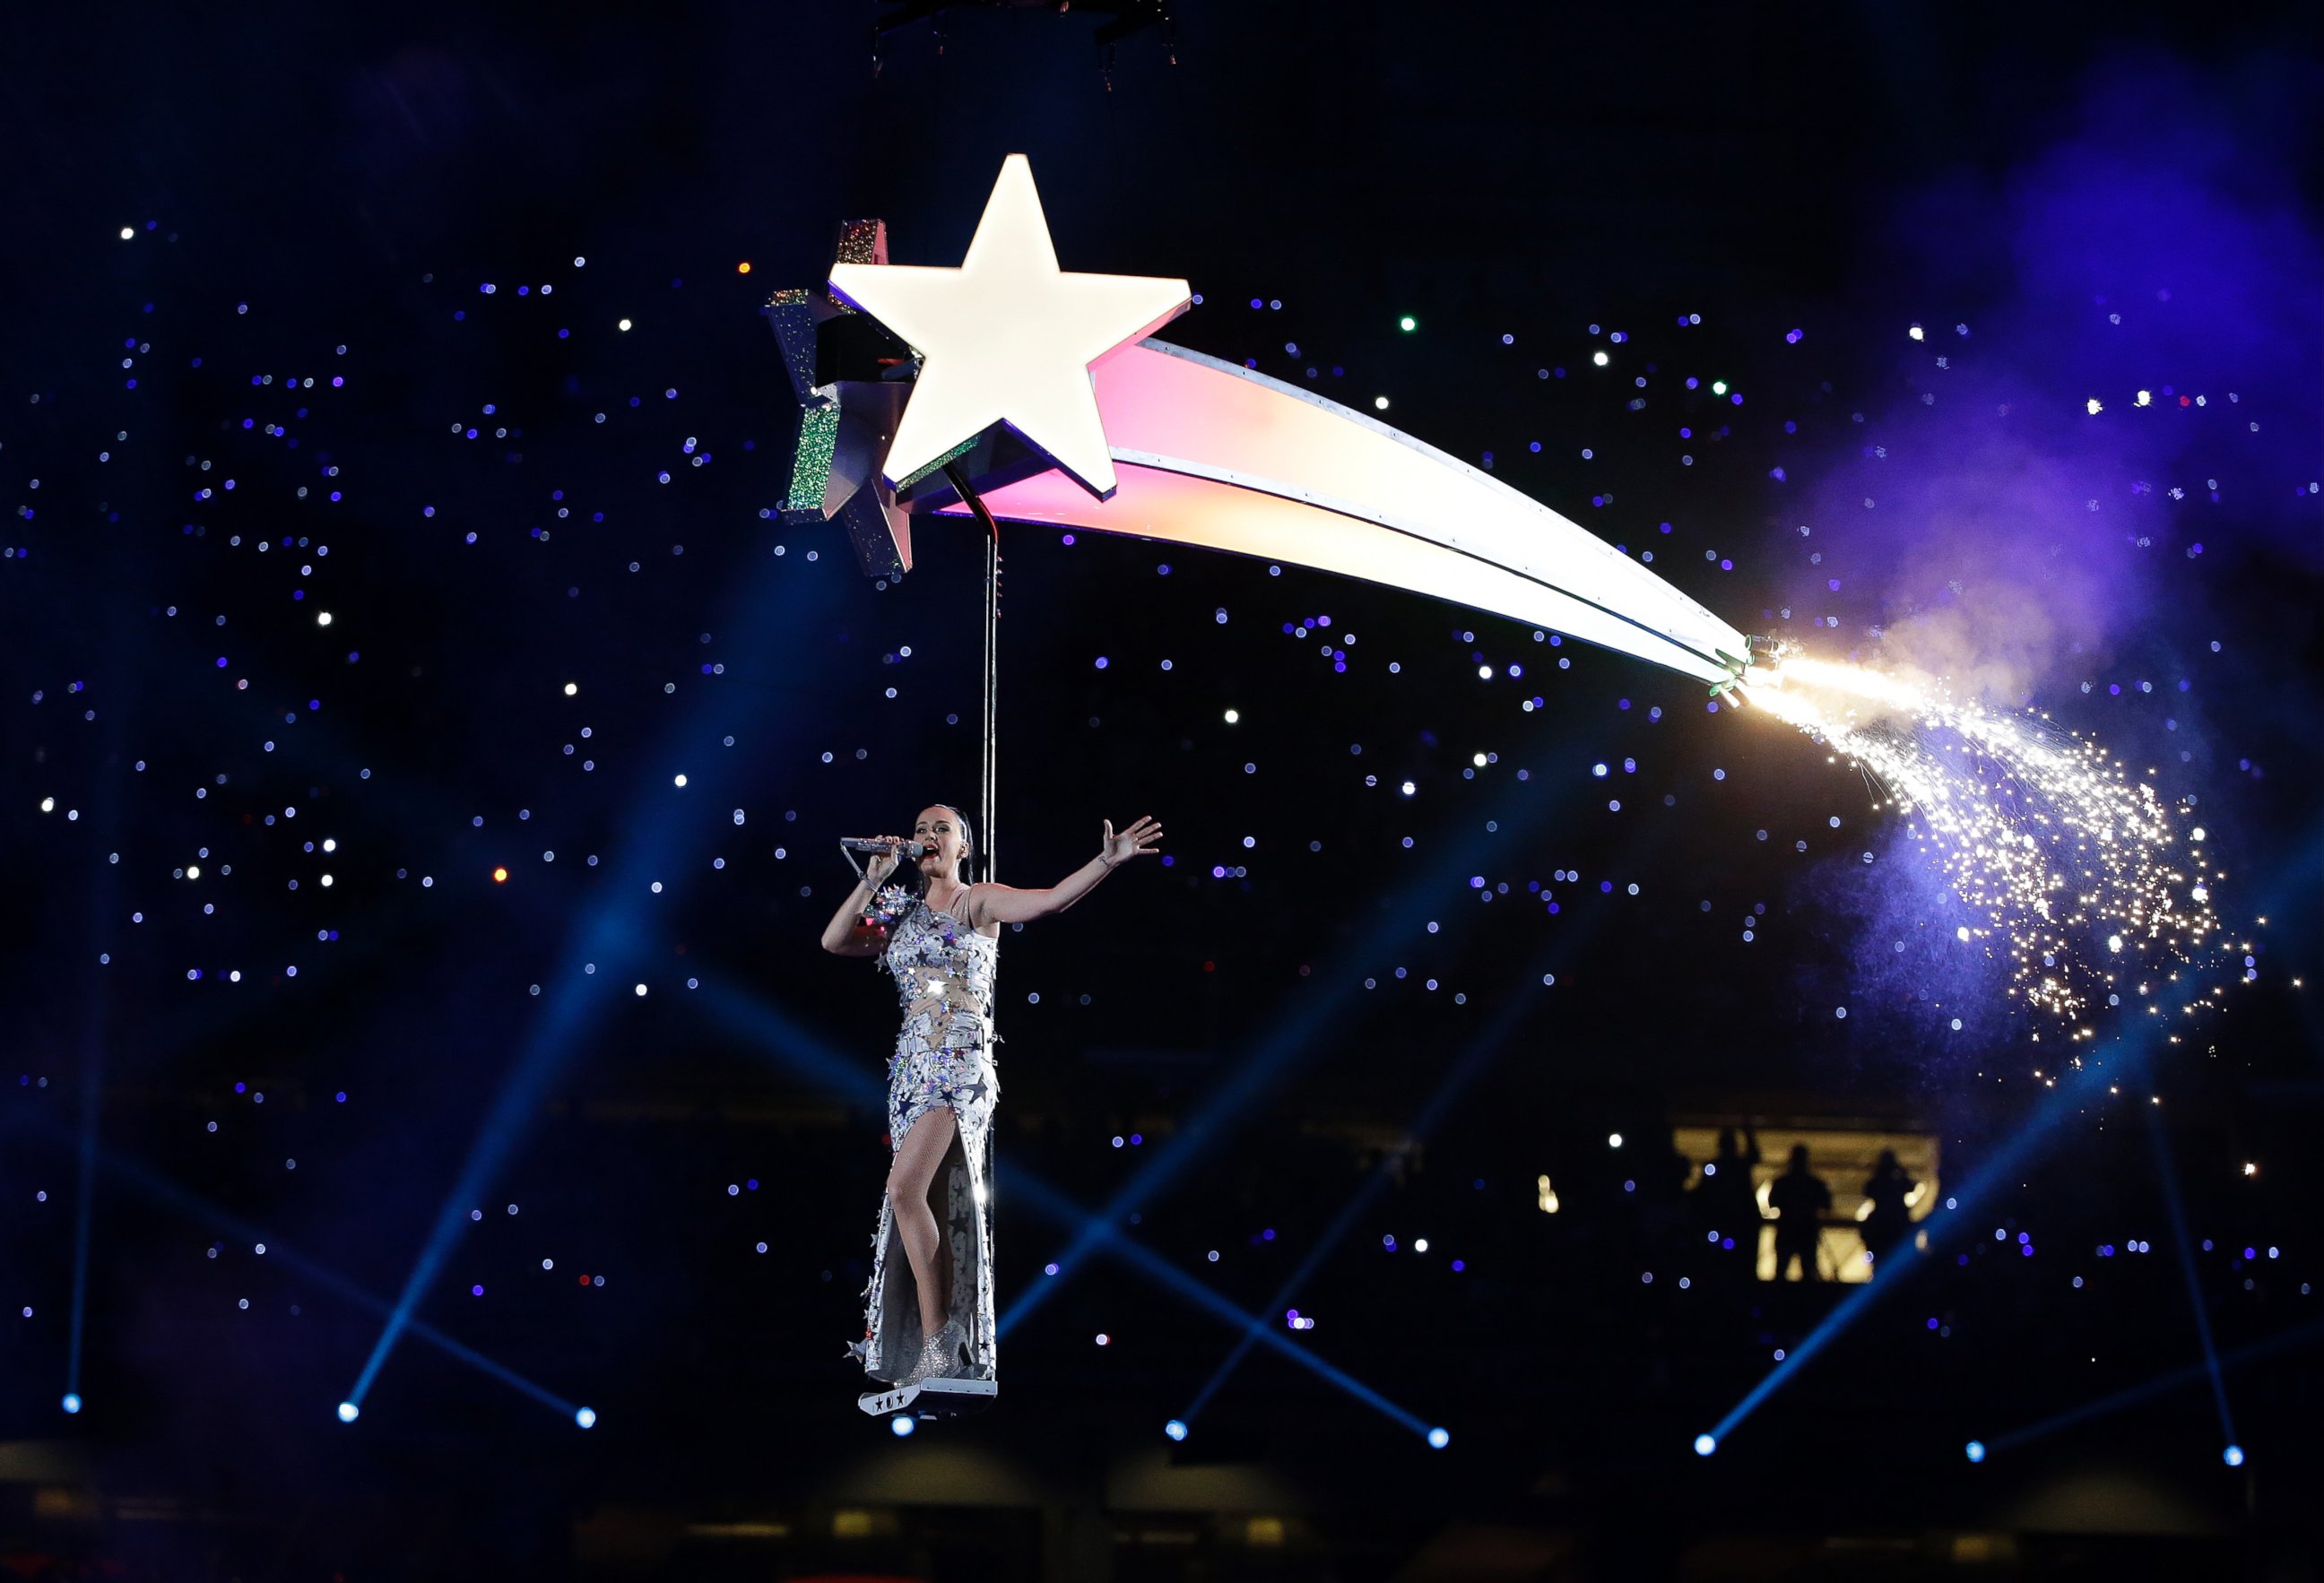 PHOTO: Katy Perry performs during halftime of NFL Super Bowl XLIX football game between the Seattle Seahawks and the New England Patriots, Feb. 1, 2015, in Glendale, Ariz.